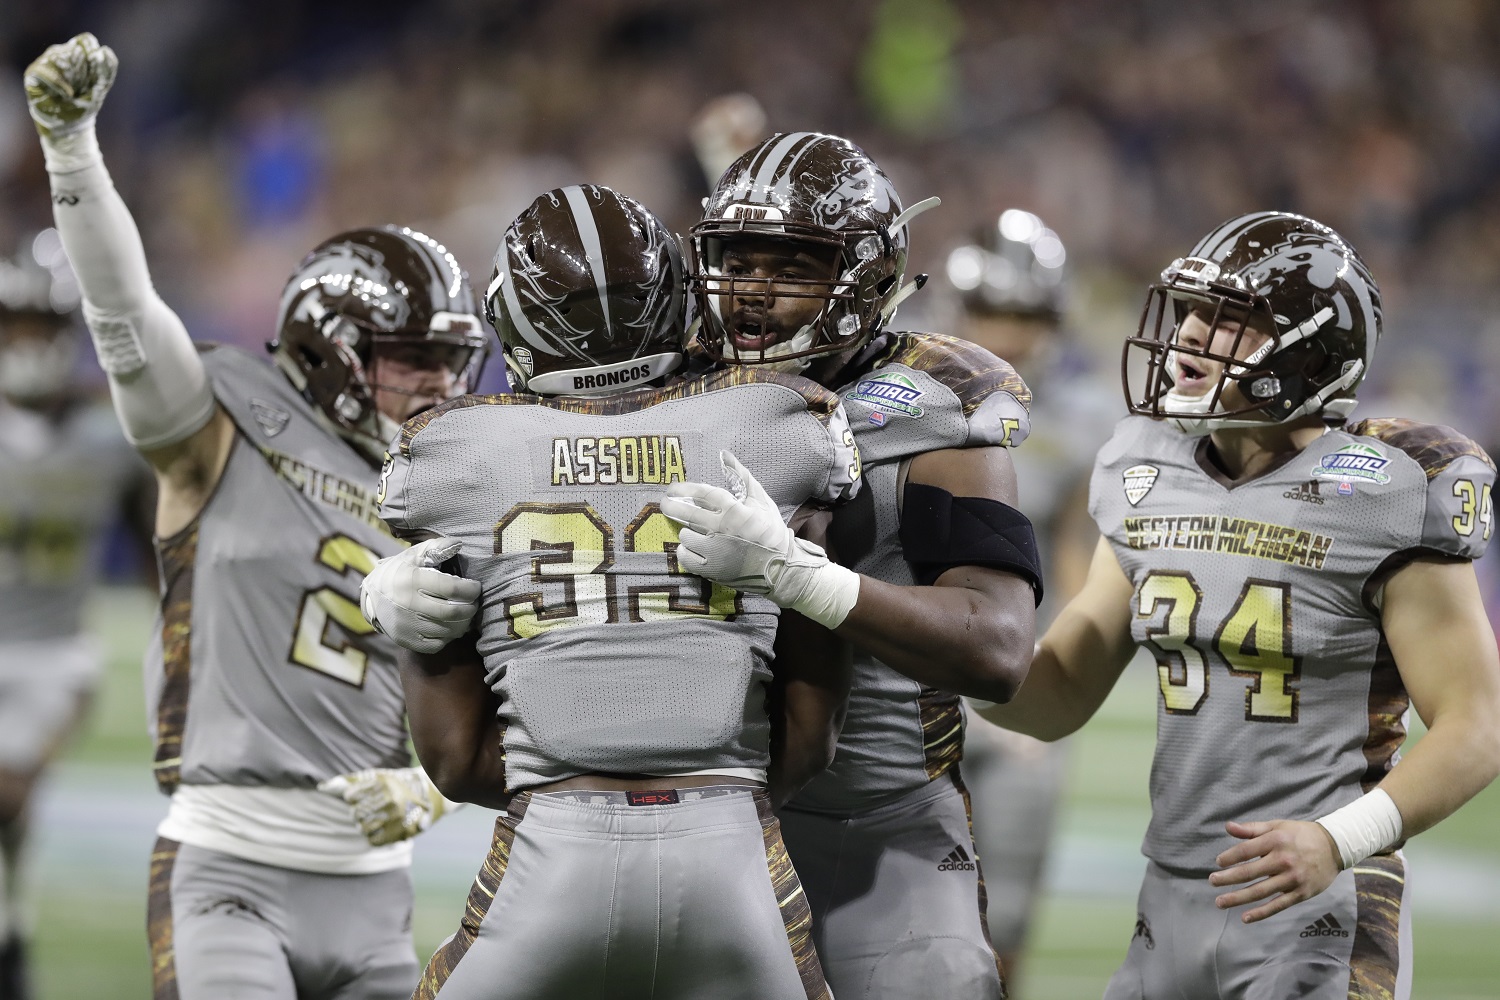 Western Michigan players celebrate a sack by defensive lineman Eric Assoua (33) during the first half of the Mid-American Conference championship NCAA college football game against Ohio, Friday, Dec. 2, 2016, in Detroit. (AP Photo/Carlos Osorio)